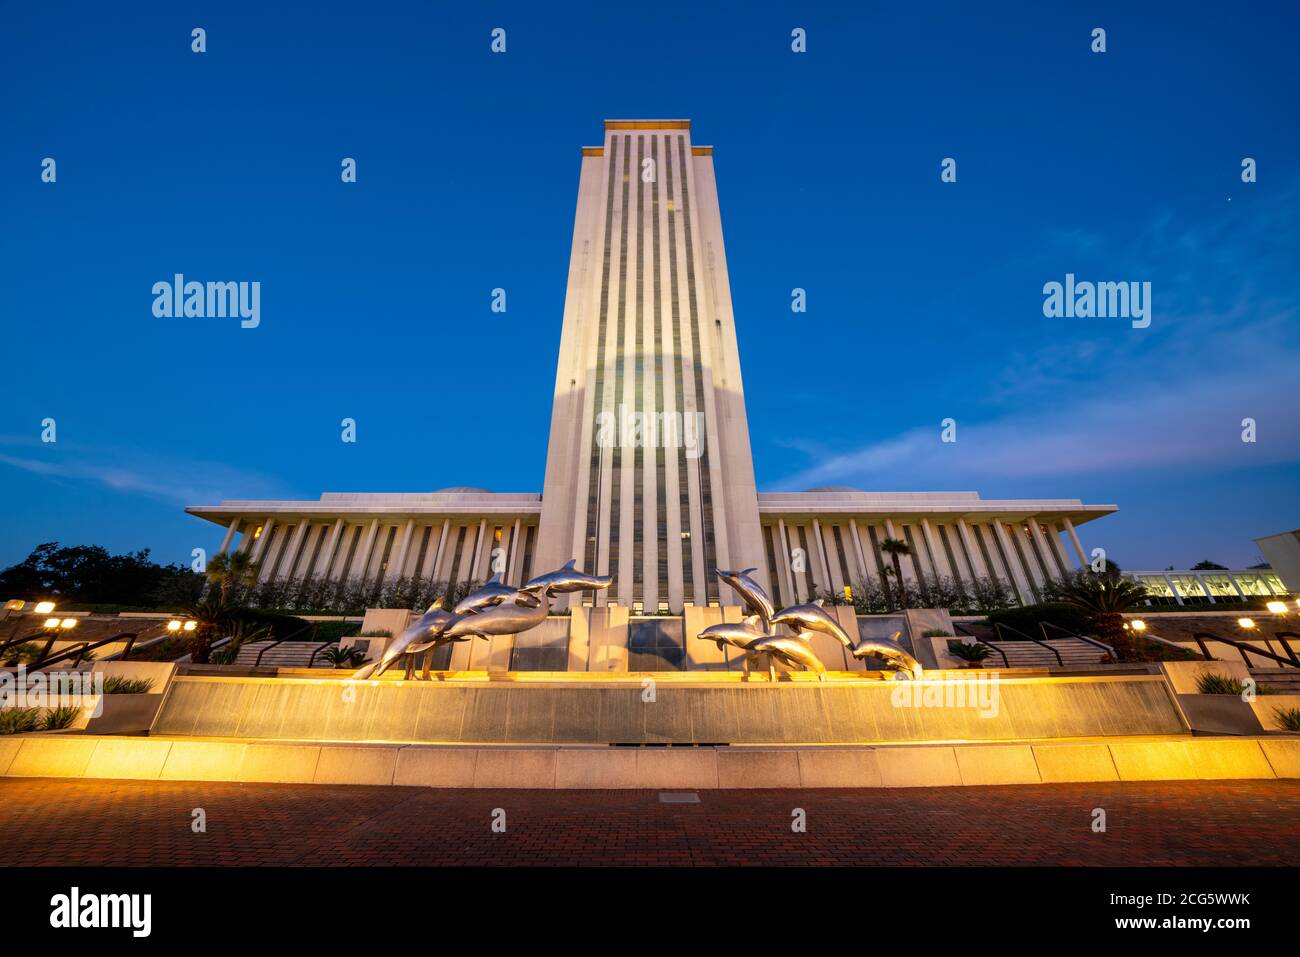 Architecture Tallahassee FL Florida State Capitol Building at night Stock Photo